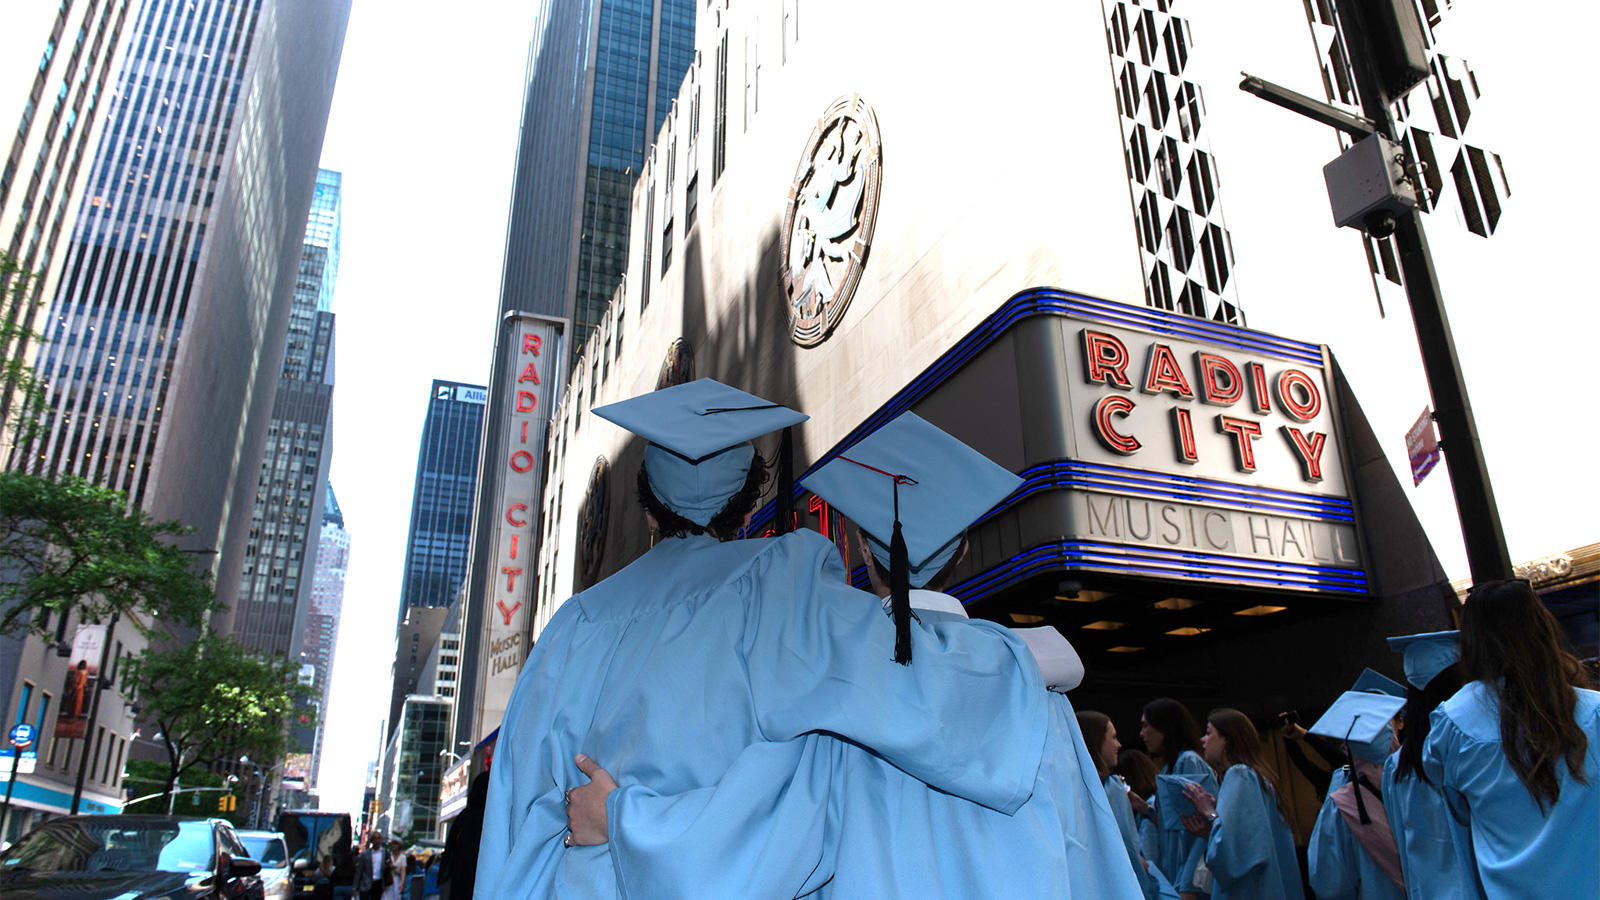 Two Barnard students in graduation regalia in front of radio city music hall